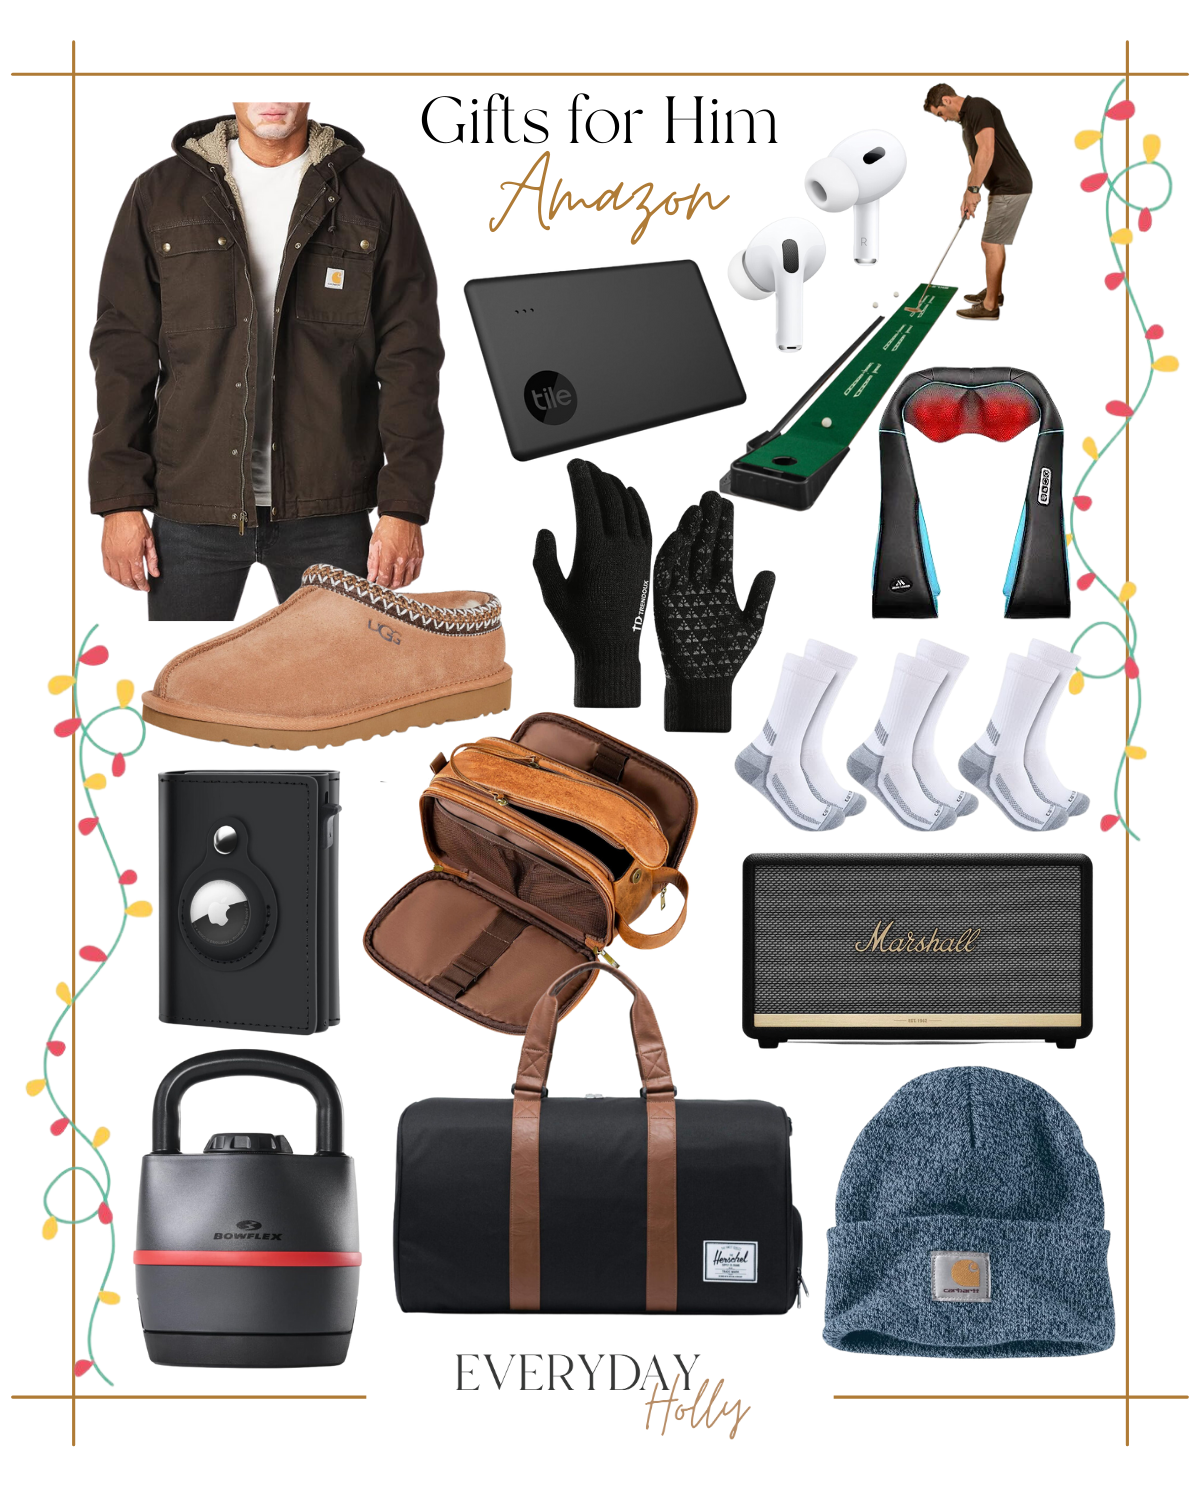 10 Holiday Gift Guides for Everyone This Season | #holiday #giftguide #giftideas #2023 #christmas #gifts #amazon #giftsforhim #travel #toiletry #golf #slippers #gloves #winter #airtag #wallet #speaker #beanie #exercise